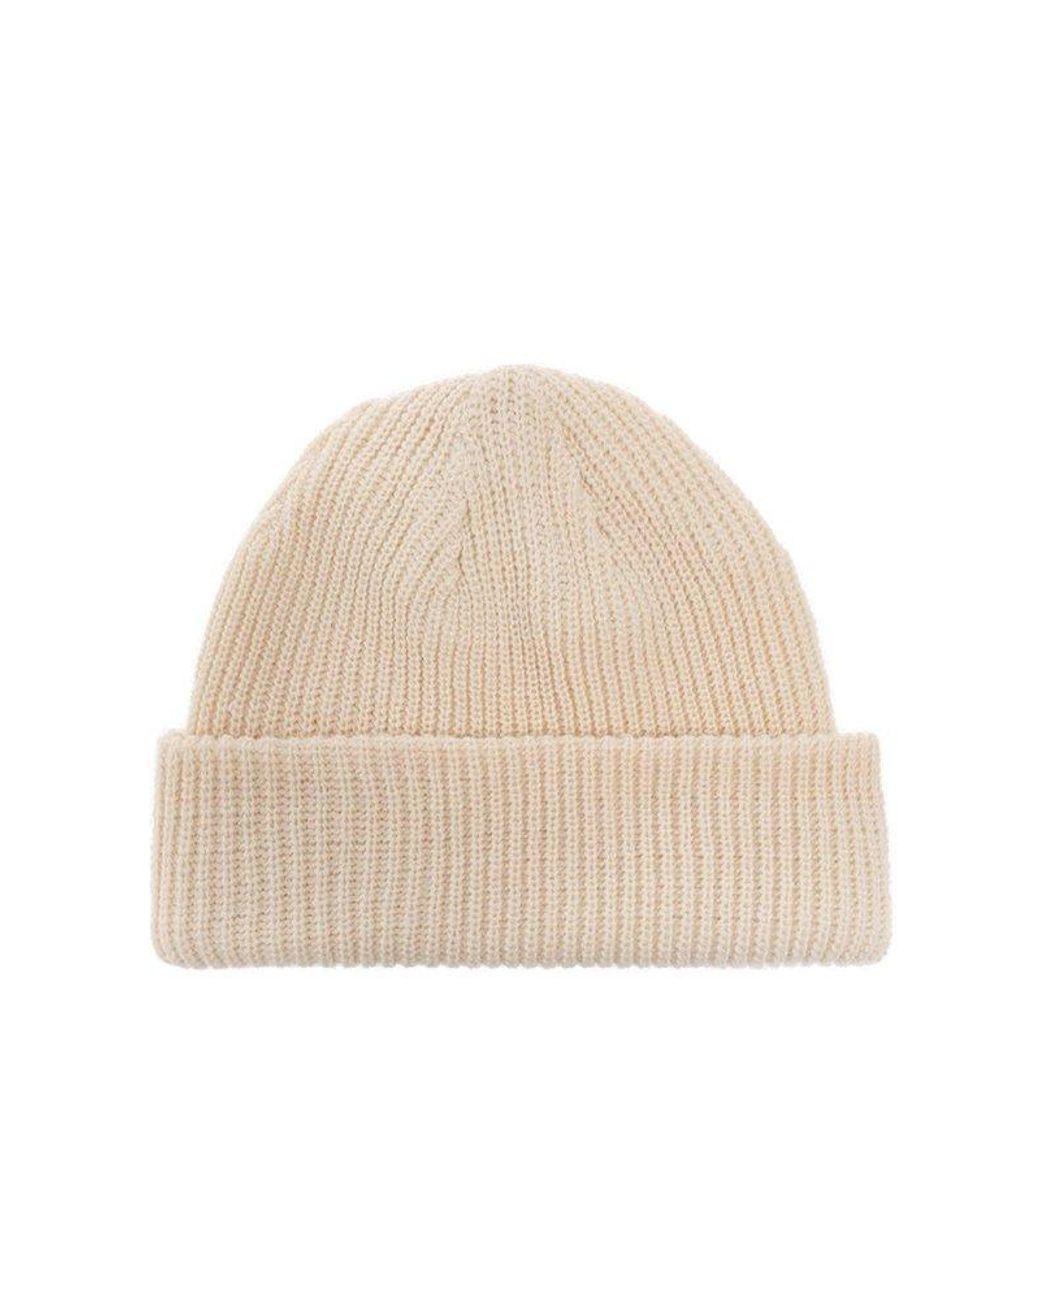 adidas Originals Beanie With Logo Patch in Natural | Lyst